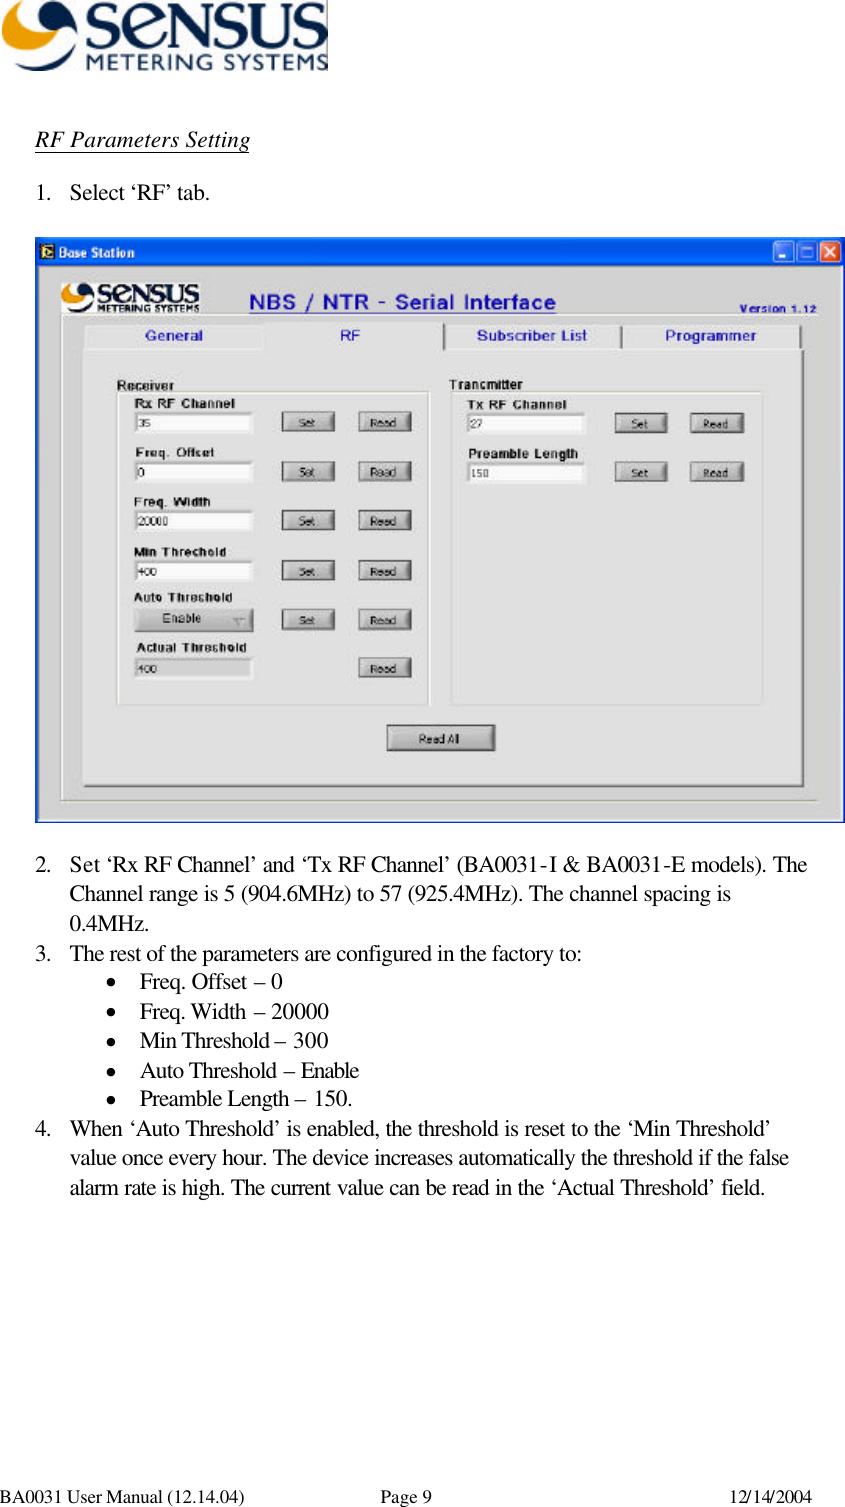      BA0031 User Manual (12.14.04) Page 9 12/14/2004 RF Parameters Setting 1. Select ‘RF’ tab.    2. Set ‘Rx RF Channel’ and ‘Tx RF Channel’ (BA0031-I &amp; BA0031-E models). The Channel range is 5 (904.6MHz) to 57 (925.4MHz). The channel spacing is 0.4MHz. 3. The rest of the parameters are configured in the factory to: • Freq. Offset – 0 • Freq. Width – 20000 • Min Threshold – 300 • Auto Threshold – Enable • Preamble Length – 150. 4. When ‘Auto Threshold’ is enabled, the threshold is reset to the ‘Min Threshold’ value once every hour. The device increases automatically the threshold if the false alarm rate is high. The current value can be read in the ‘Actual Threshold’ field.   